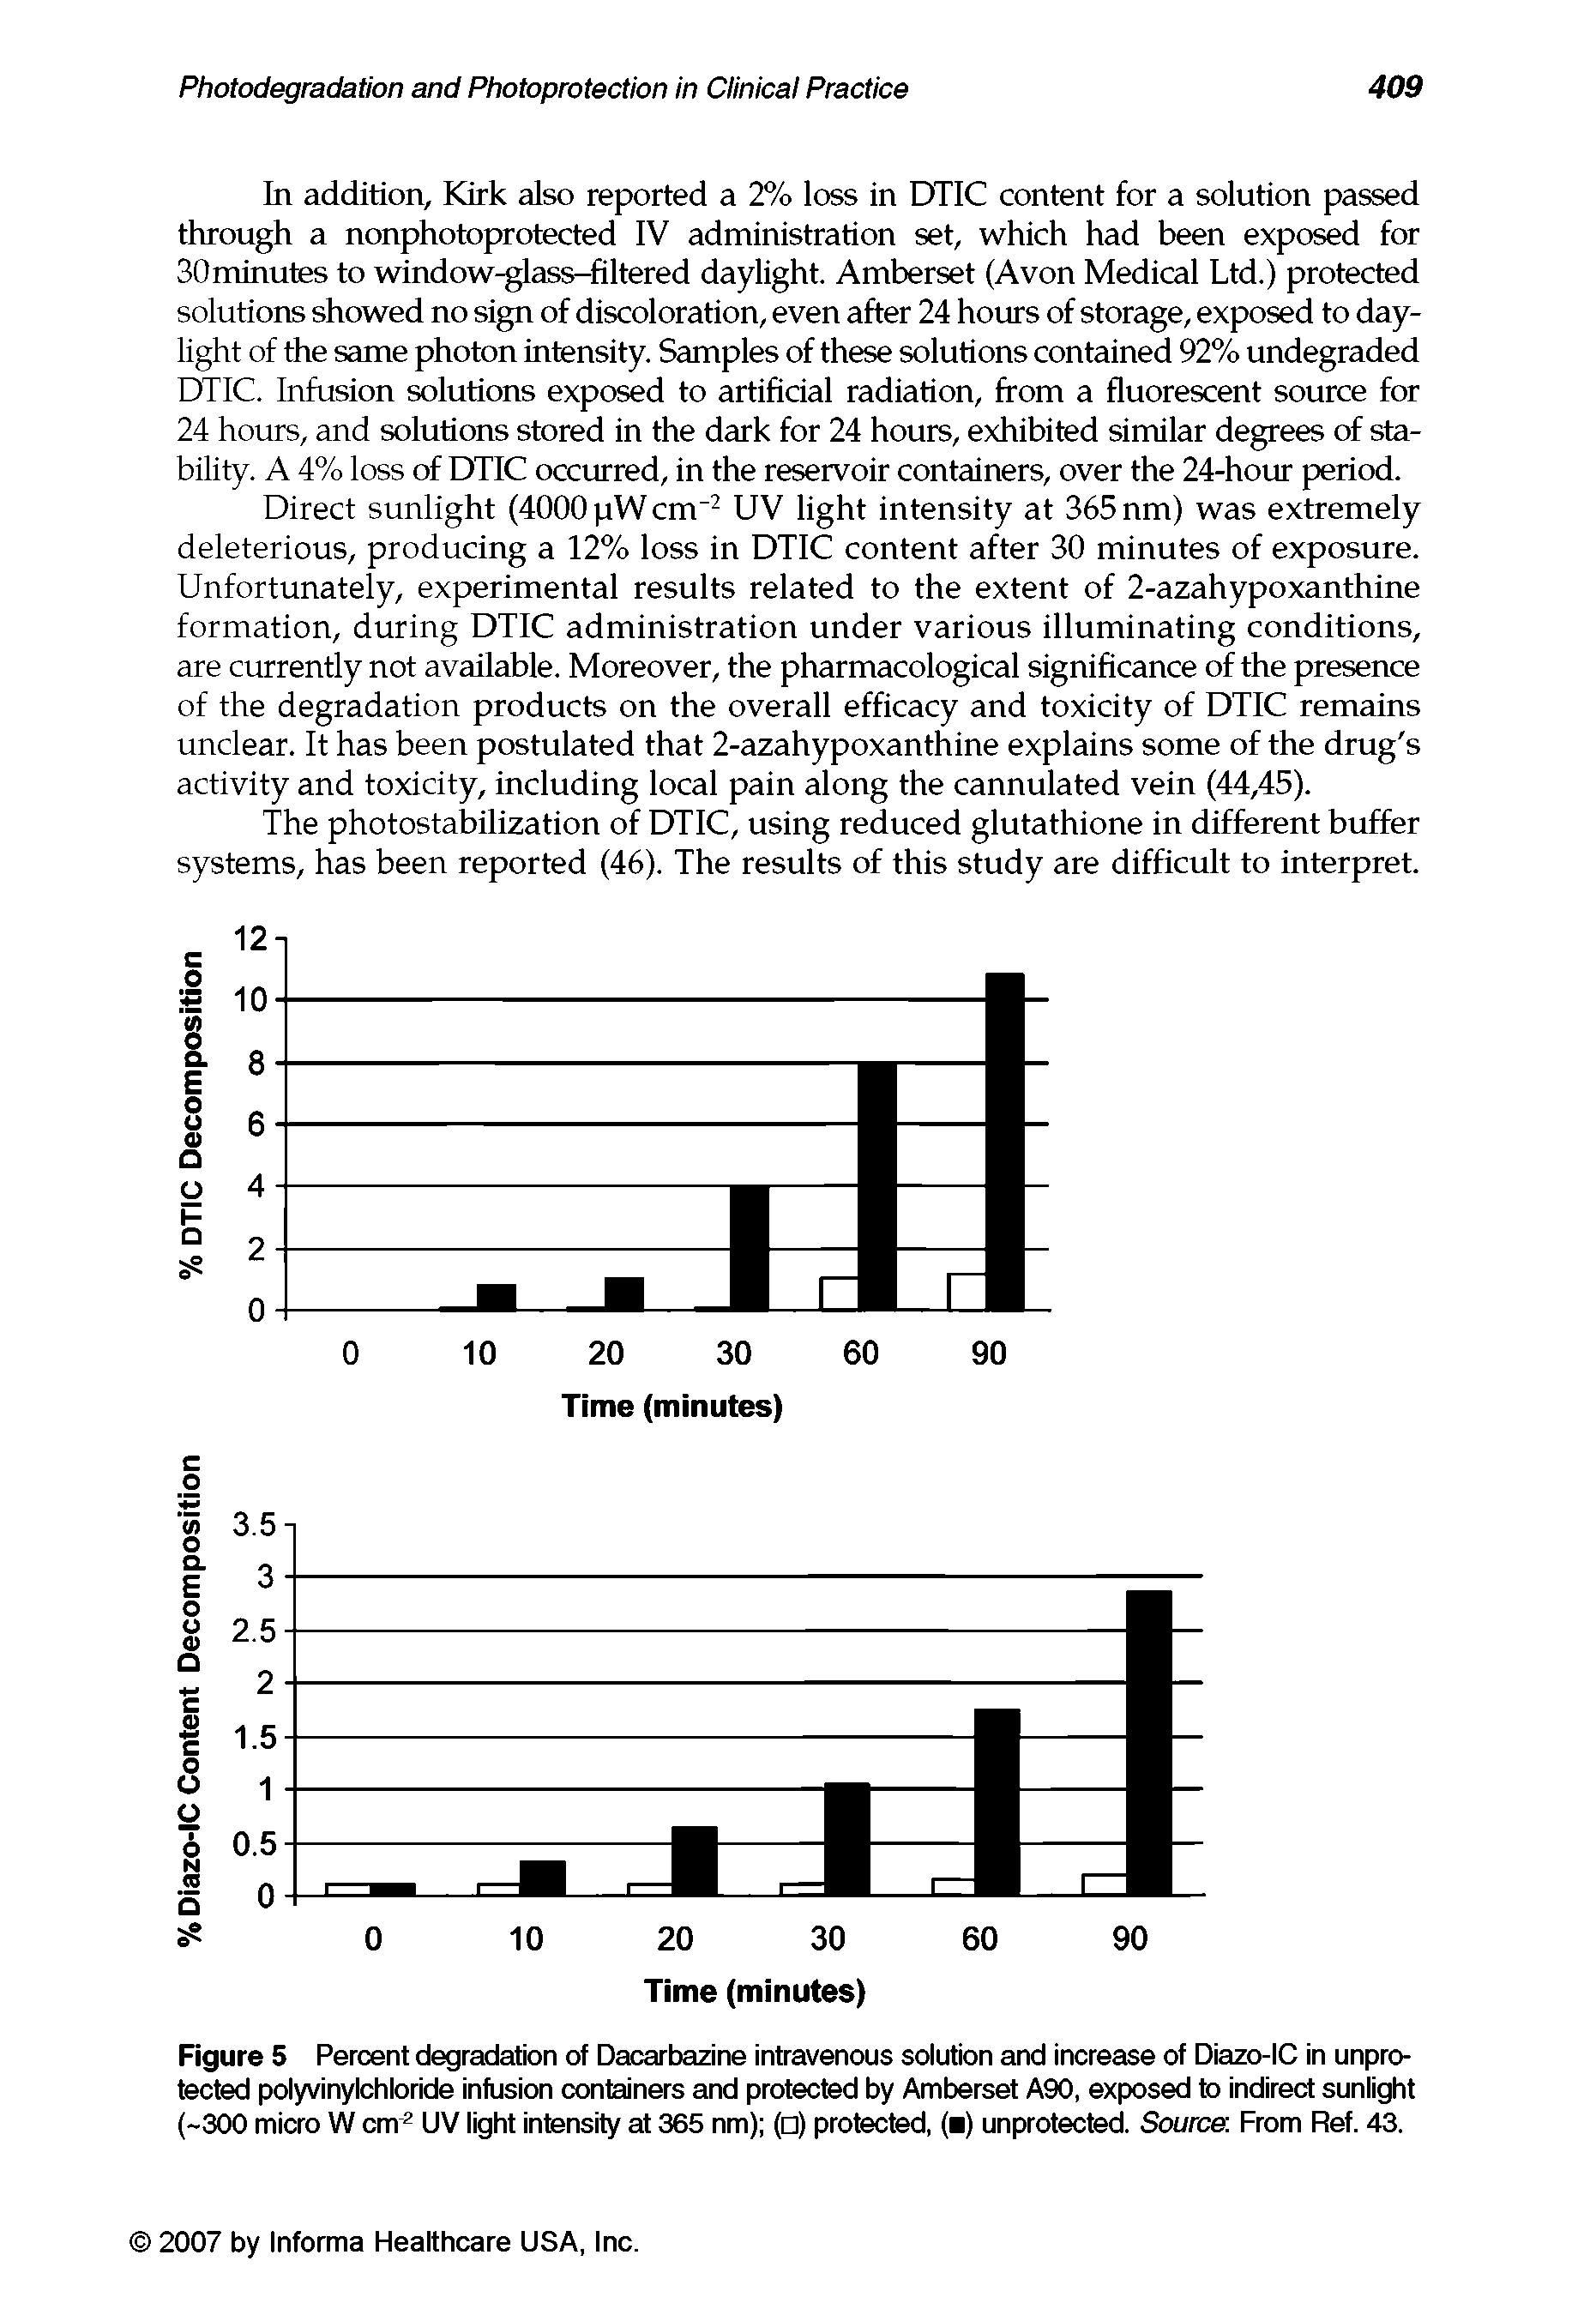 Figure 5 Percent degradation of Dacarbazine intravenous solution and increase of Diazo-IC in unprotected polyvinylchloride infusion containers and protected by Amberset A90, exposed to indirect sunlight (-300 micro W cm UV light intensity at 365 nm) ( ) protected, ( ) unprotected. Source. From Ref. 43.